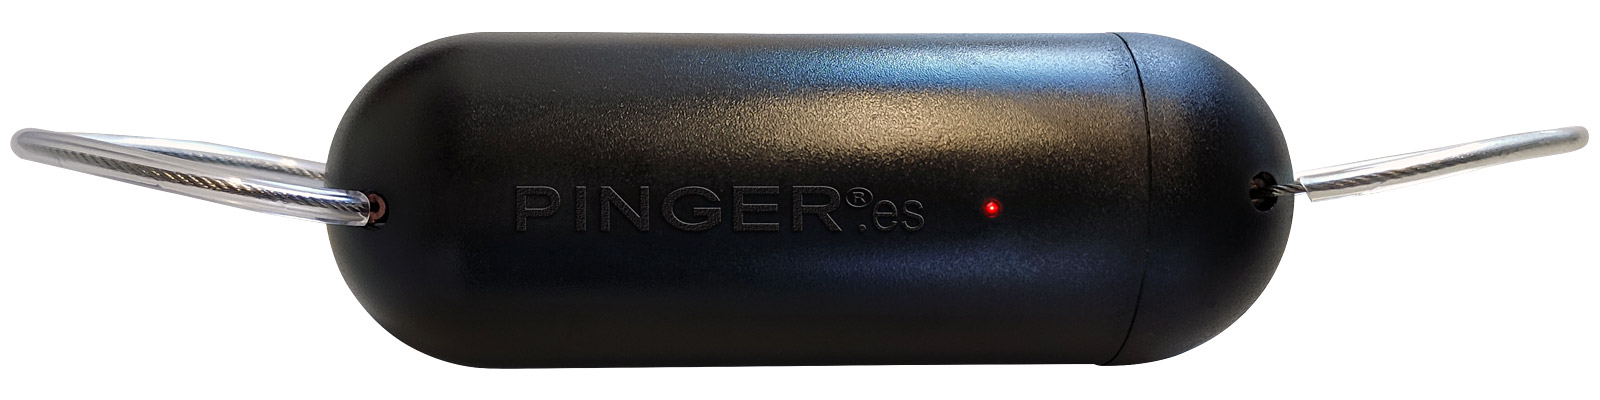 Producto Pinger 01